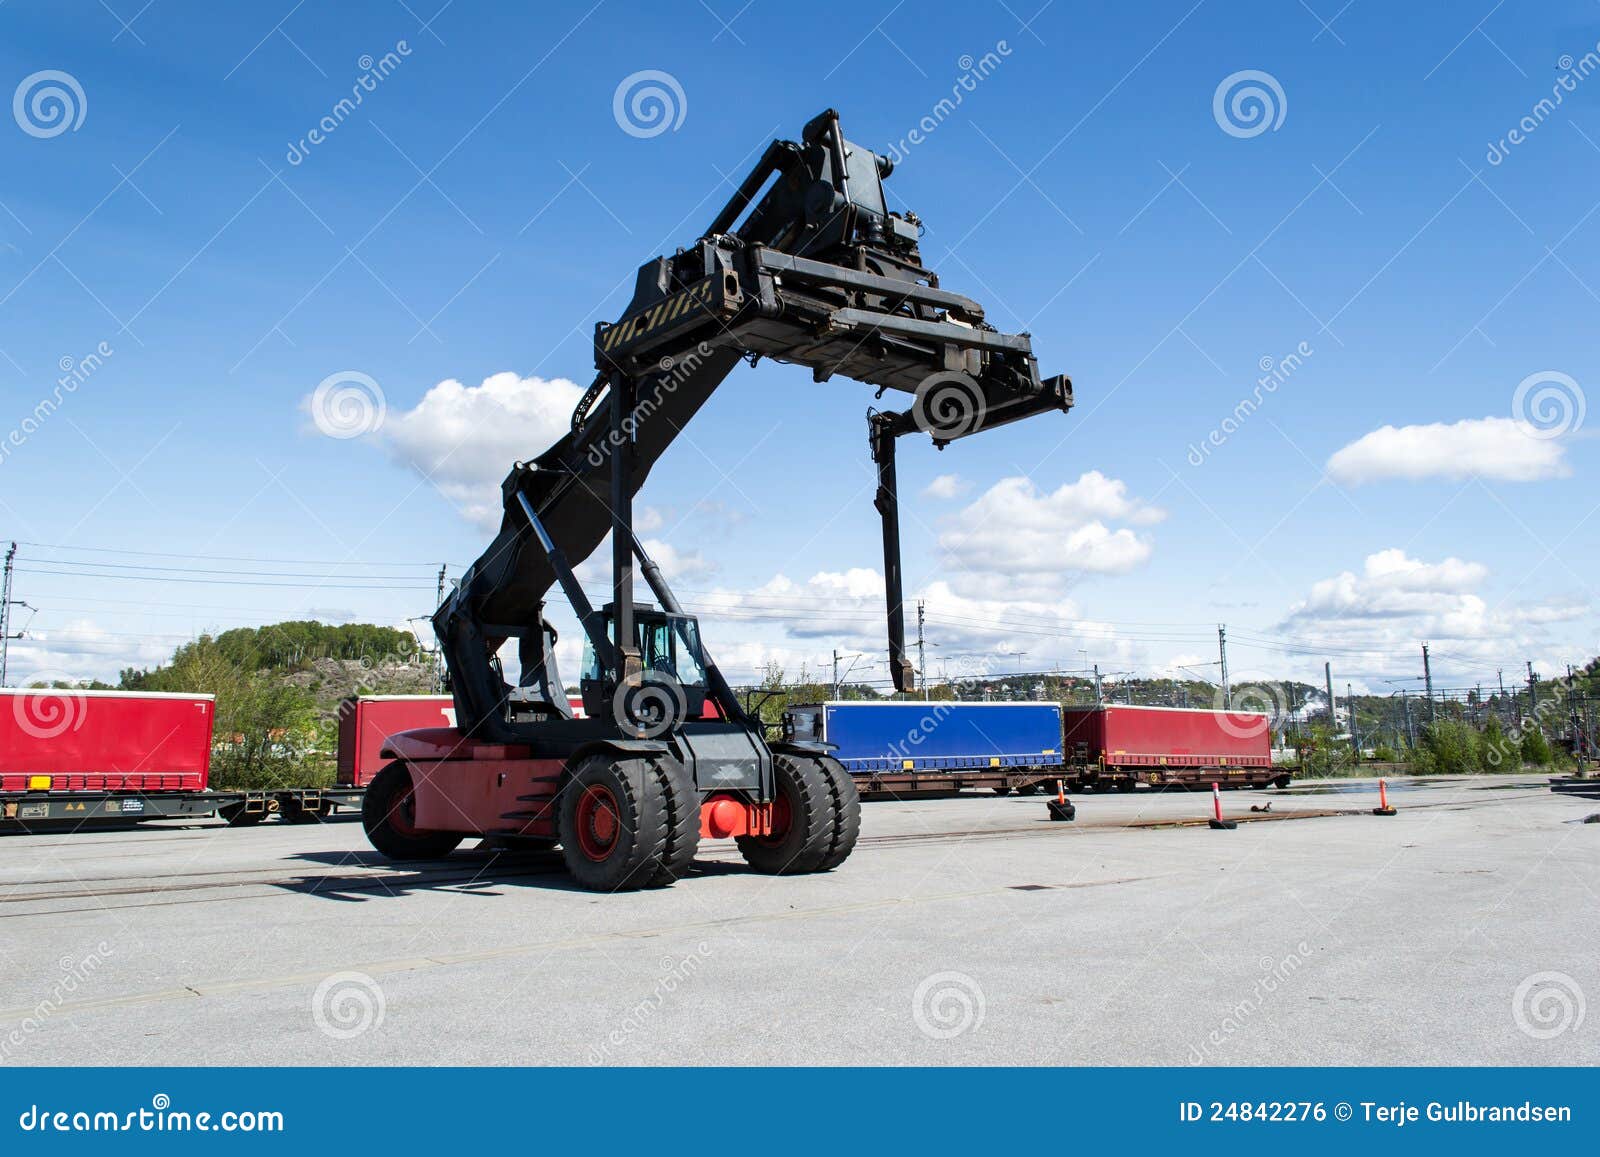 This is a large container truck at work in the dock in Halden, Norway 